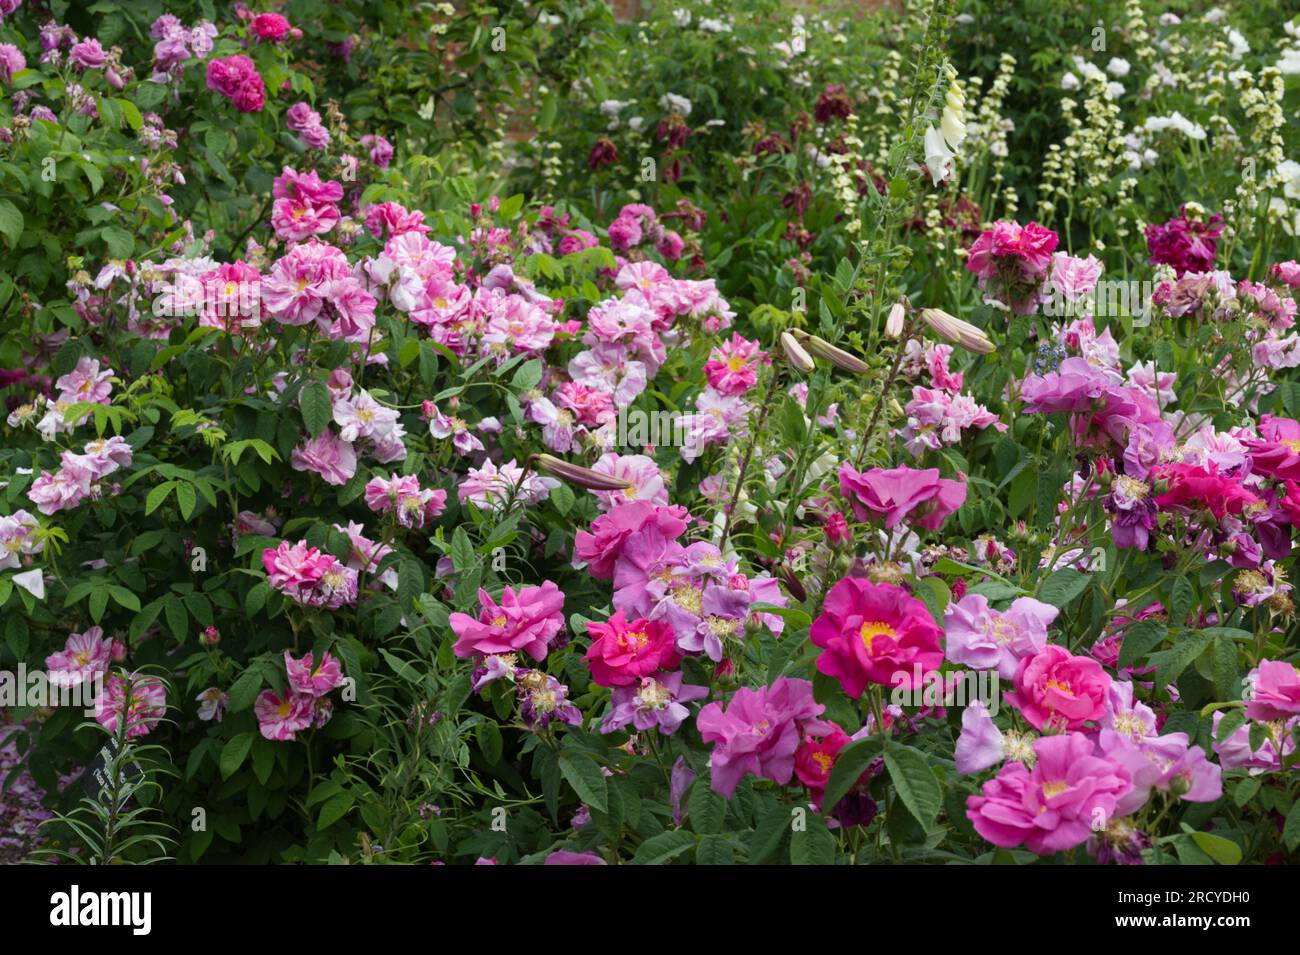 Summer garden filled with flowers including Rosa Mundi and Rosa Gallica, the Apothecary's rose, lilies and  Sisyrinchium striatum in UK garden June Stock Photo